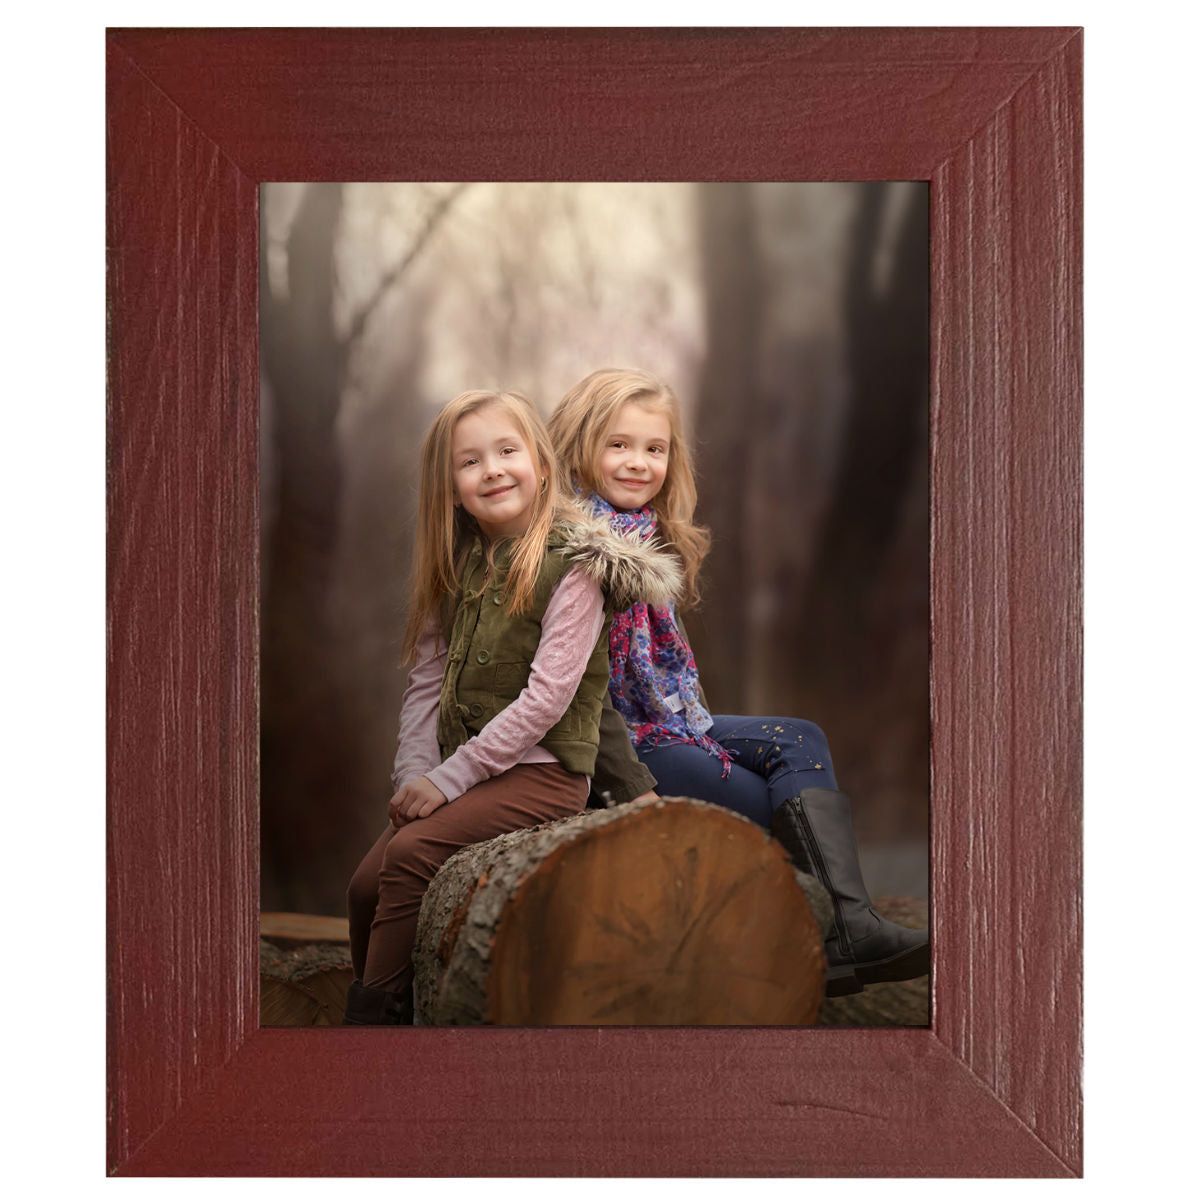 8x10 Distressed Red Wooden Picture Frame - Rustic Red Door Co.